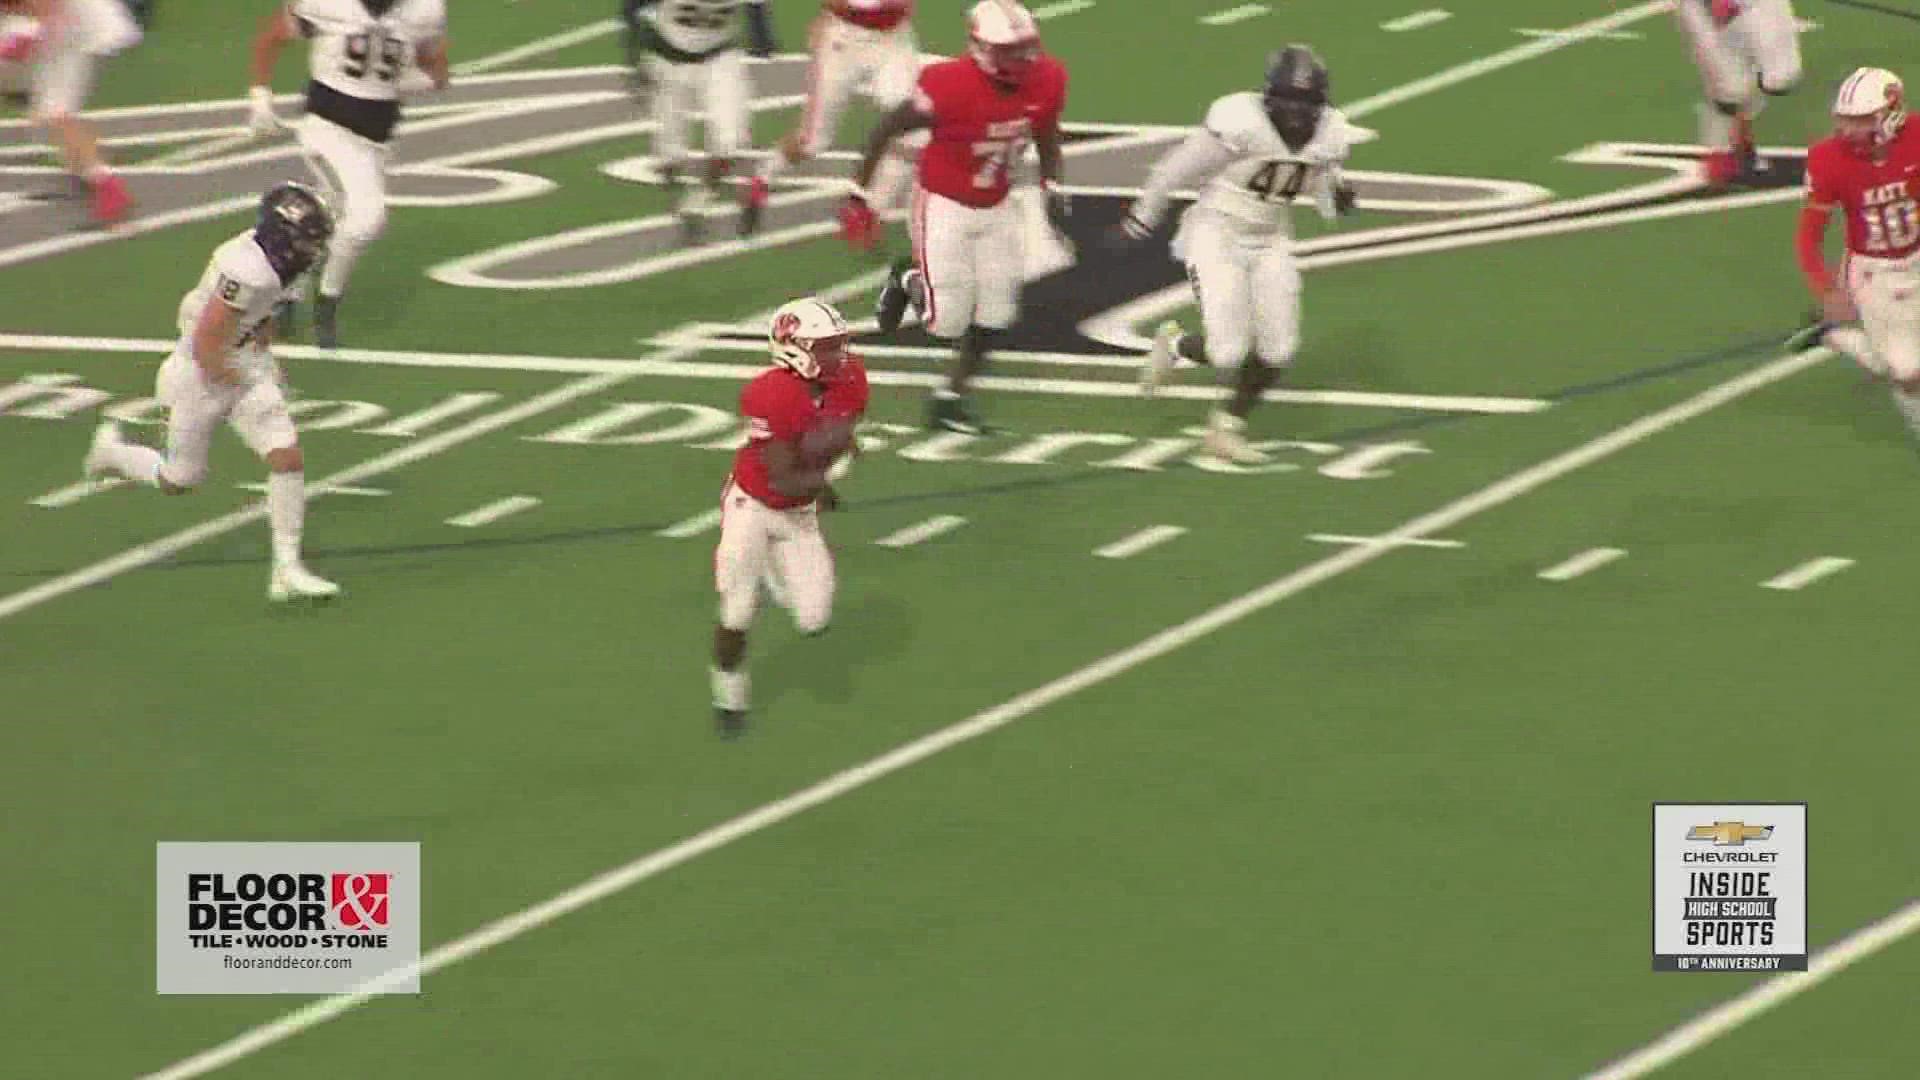 KHOU 11's Matt Musil has scores, highlights and stories from around the Houston area.